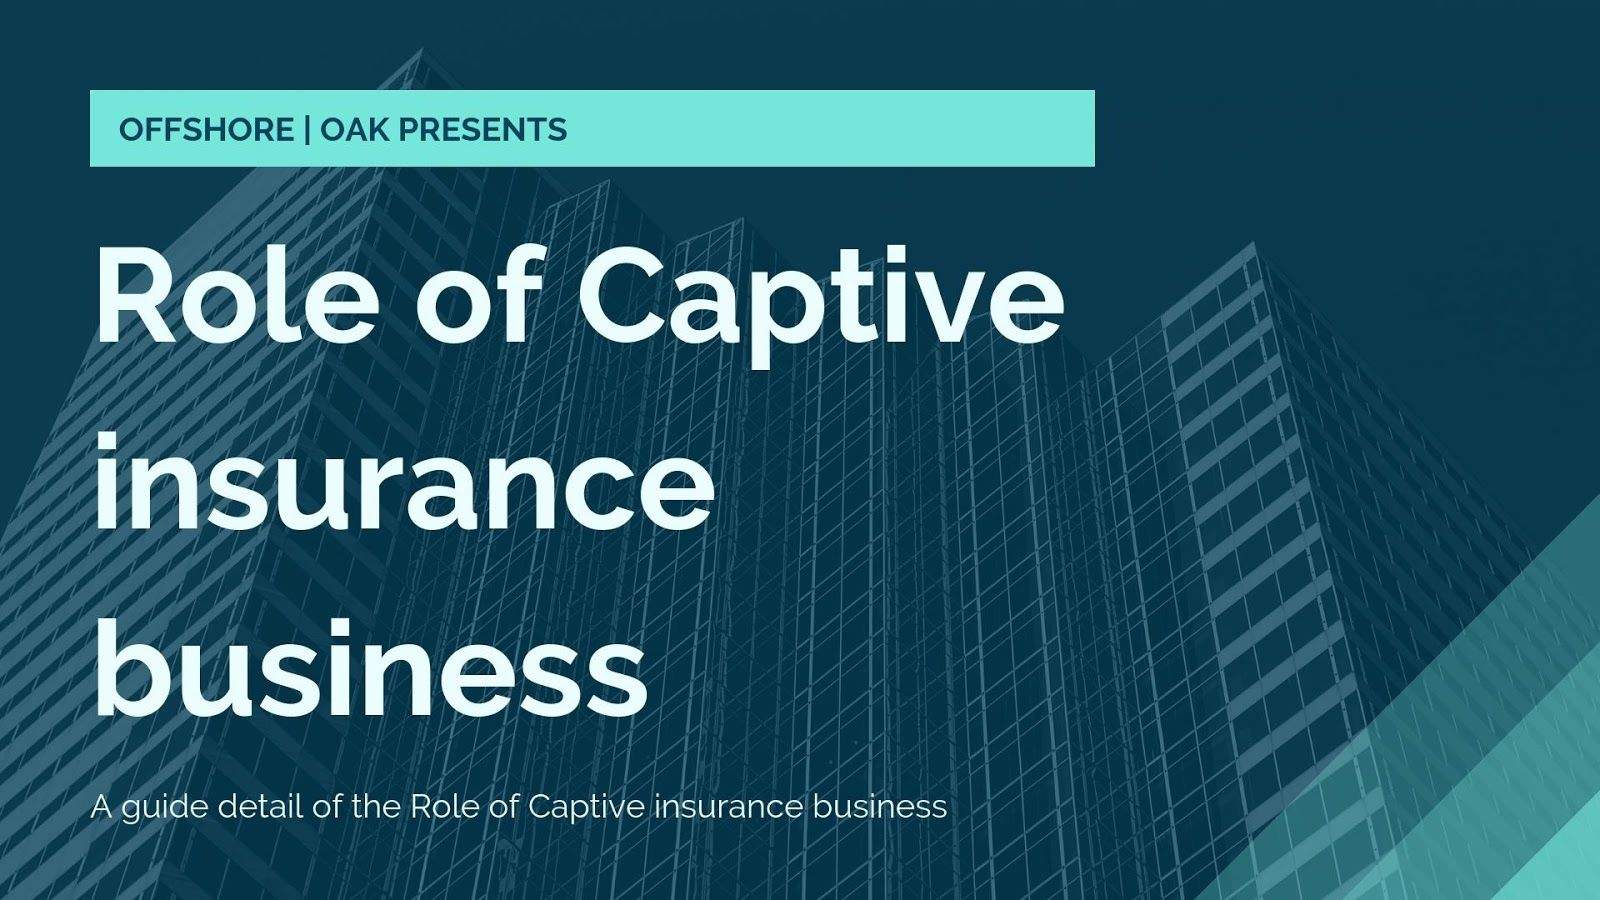 What is the Role of Captive insurance business